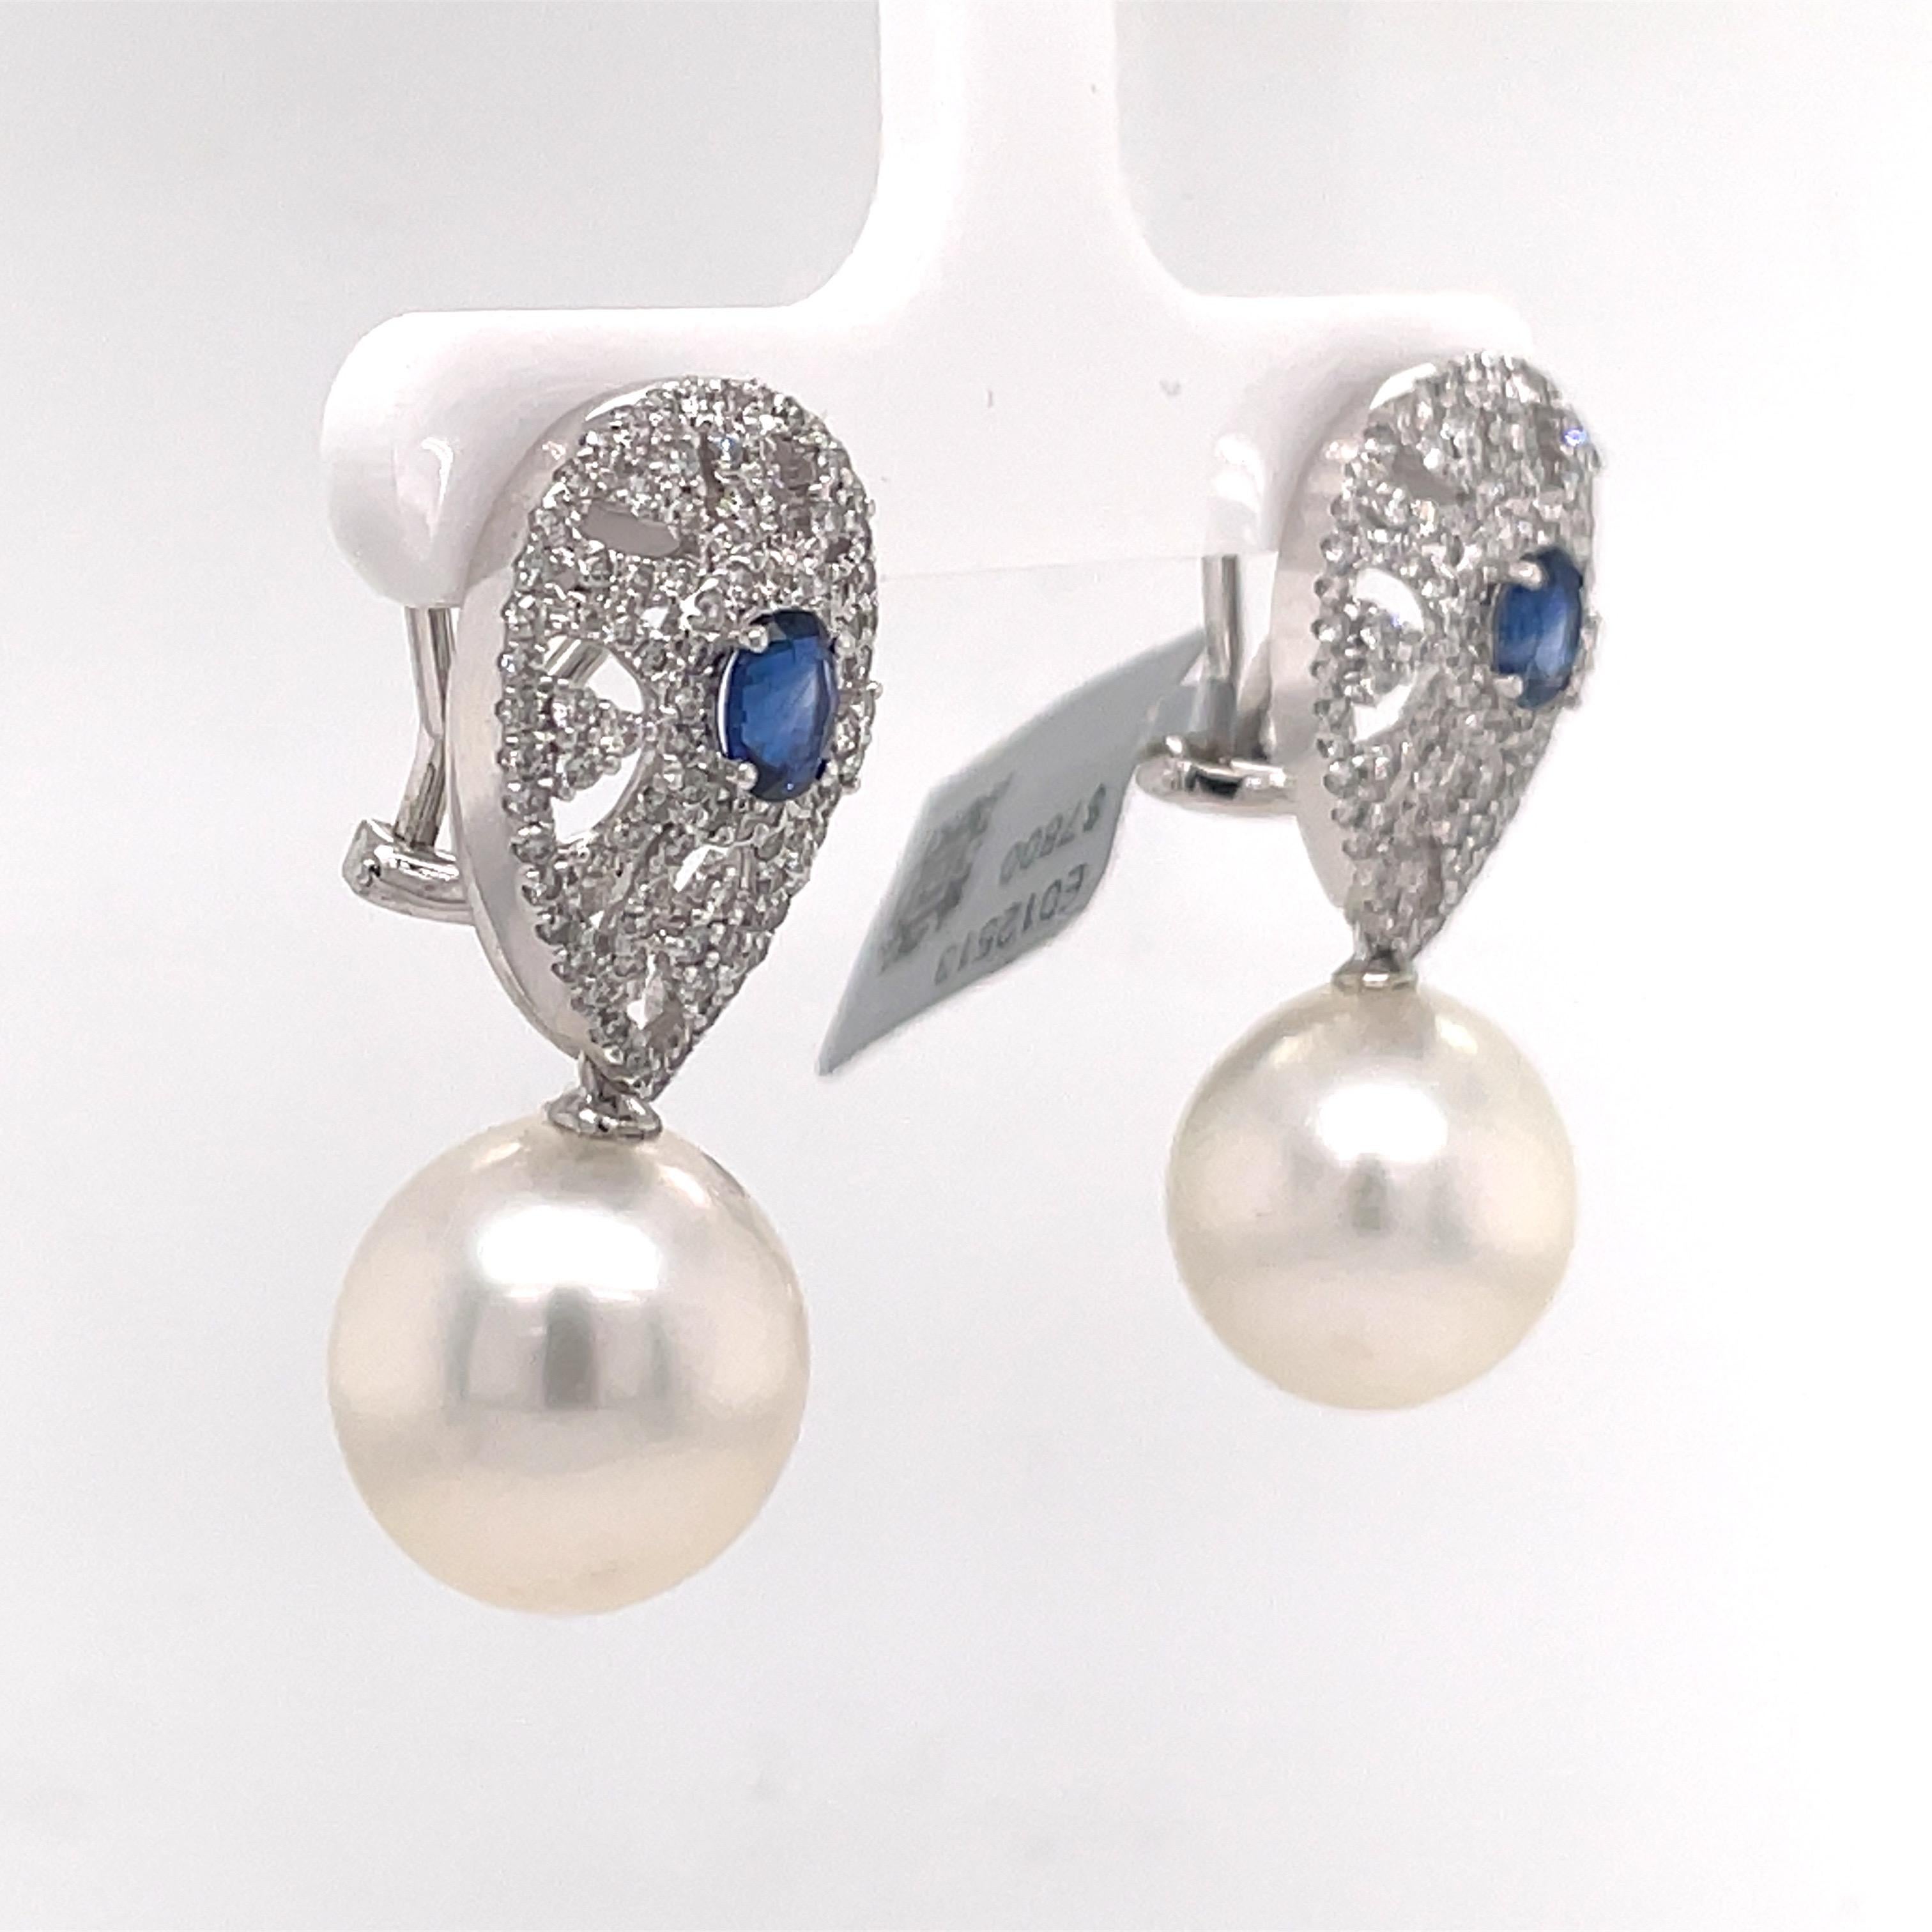 Oval Cut Sapphire Diamond South Sea Pearl Drop Earrings 2.16 Carats 18 Carat White Gold For Sale